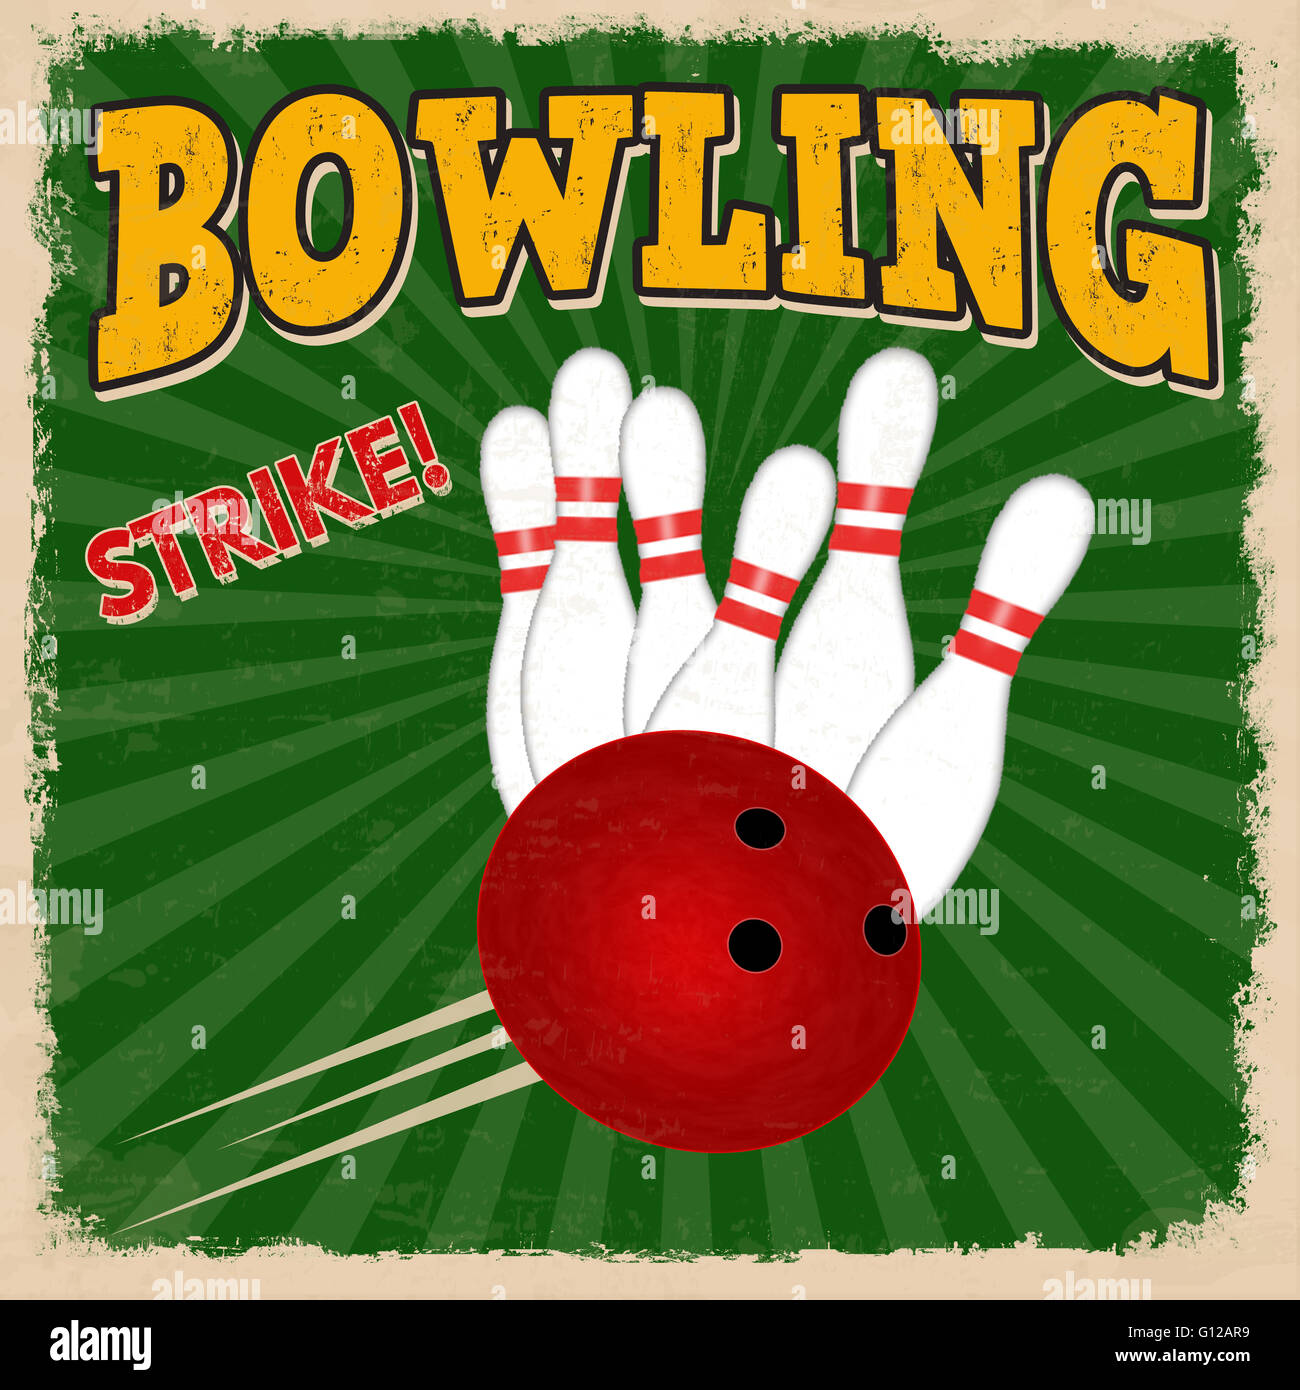 Bowling retro poster design template on green background, vector illustration Stock Photo